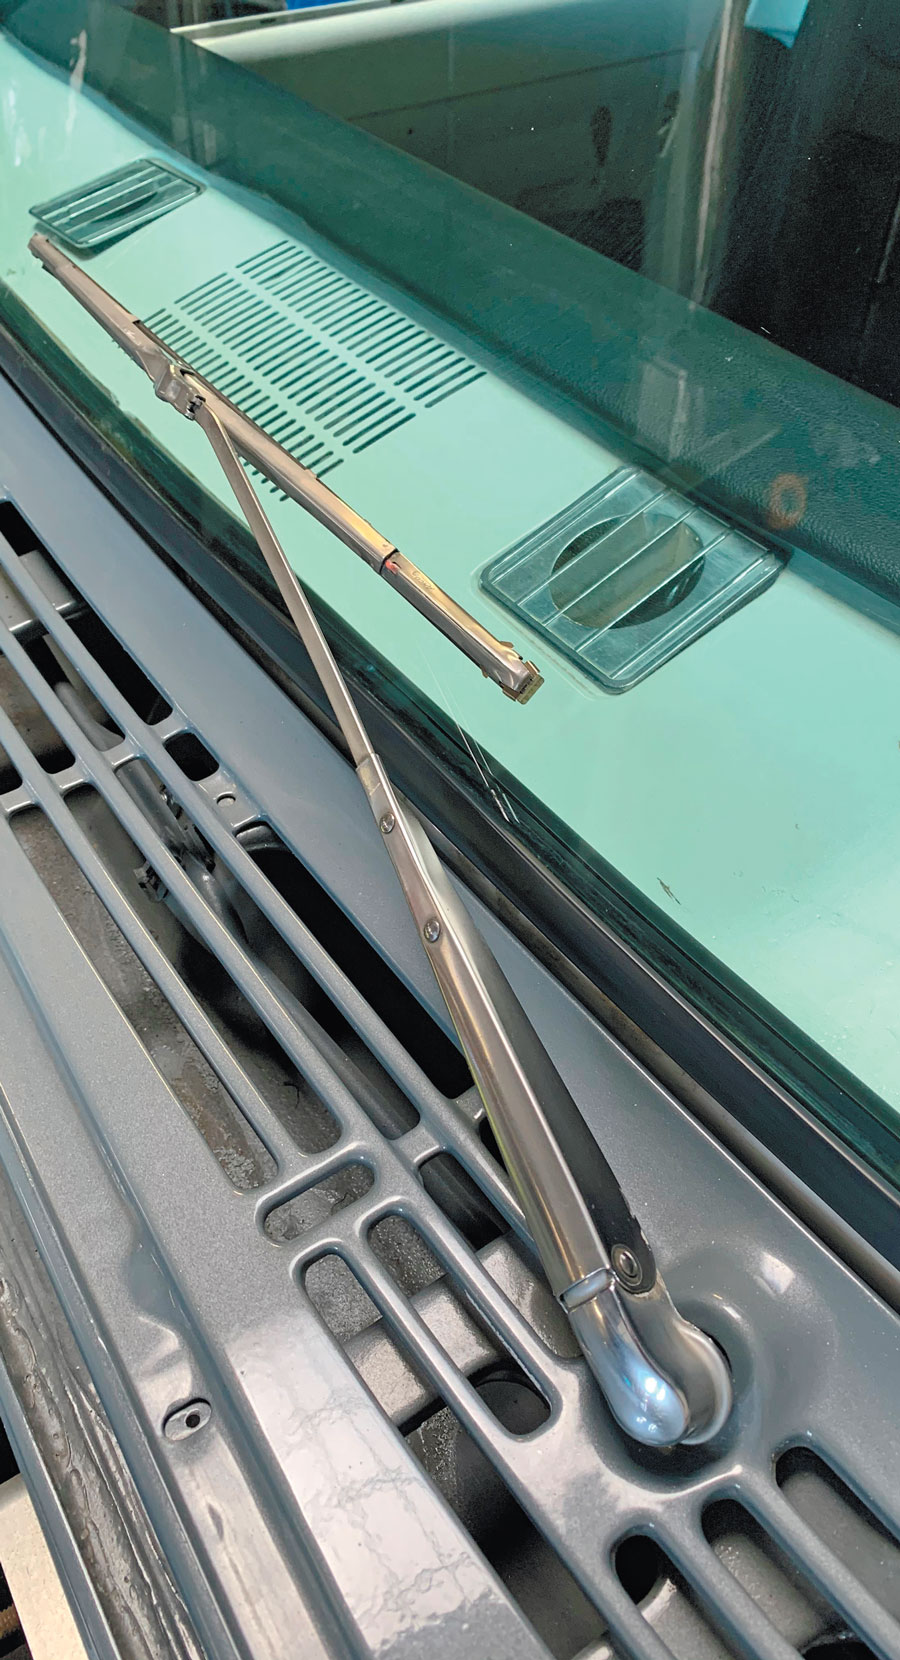 Install your wiper arms along with a fresh set of wiper blades